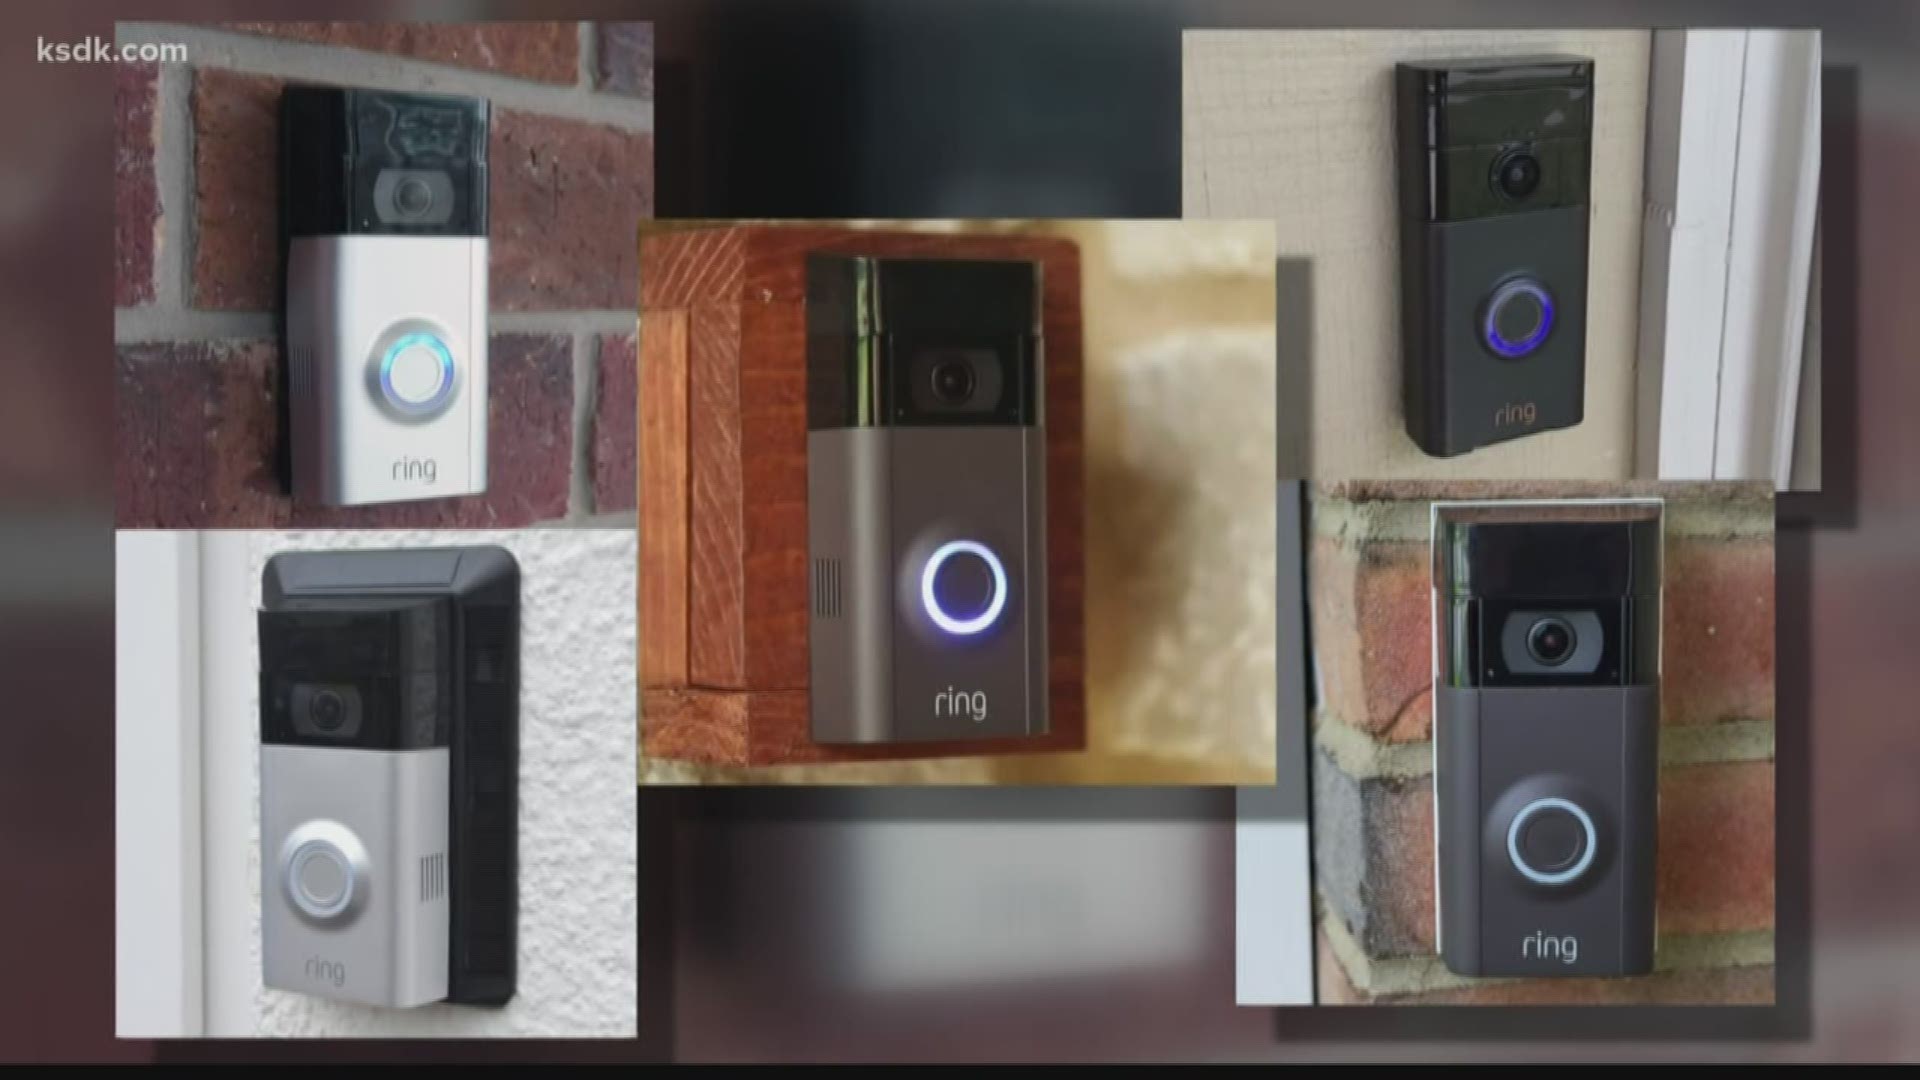 Have a Ring camera? Police can get your footage without permission